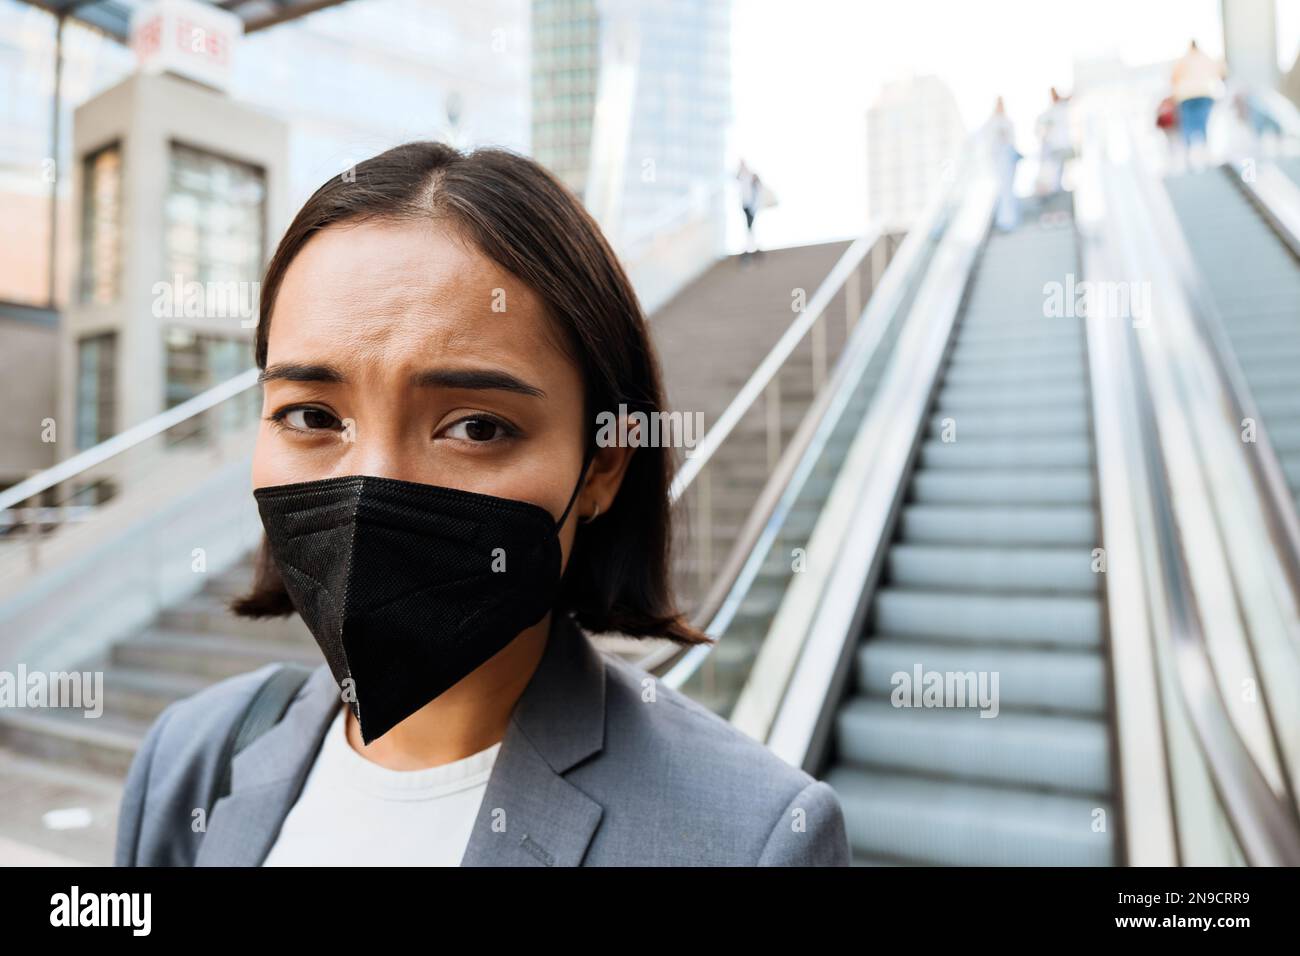 Young asian displeased woman in medical mask standing on escalator outdoors Stock Photo